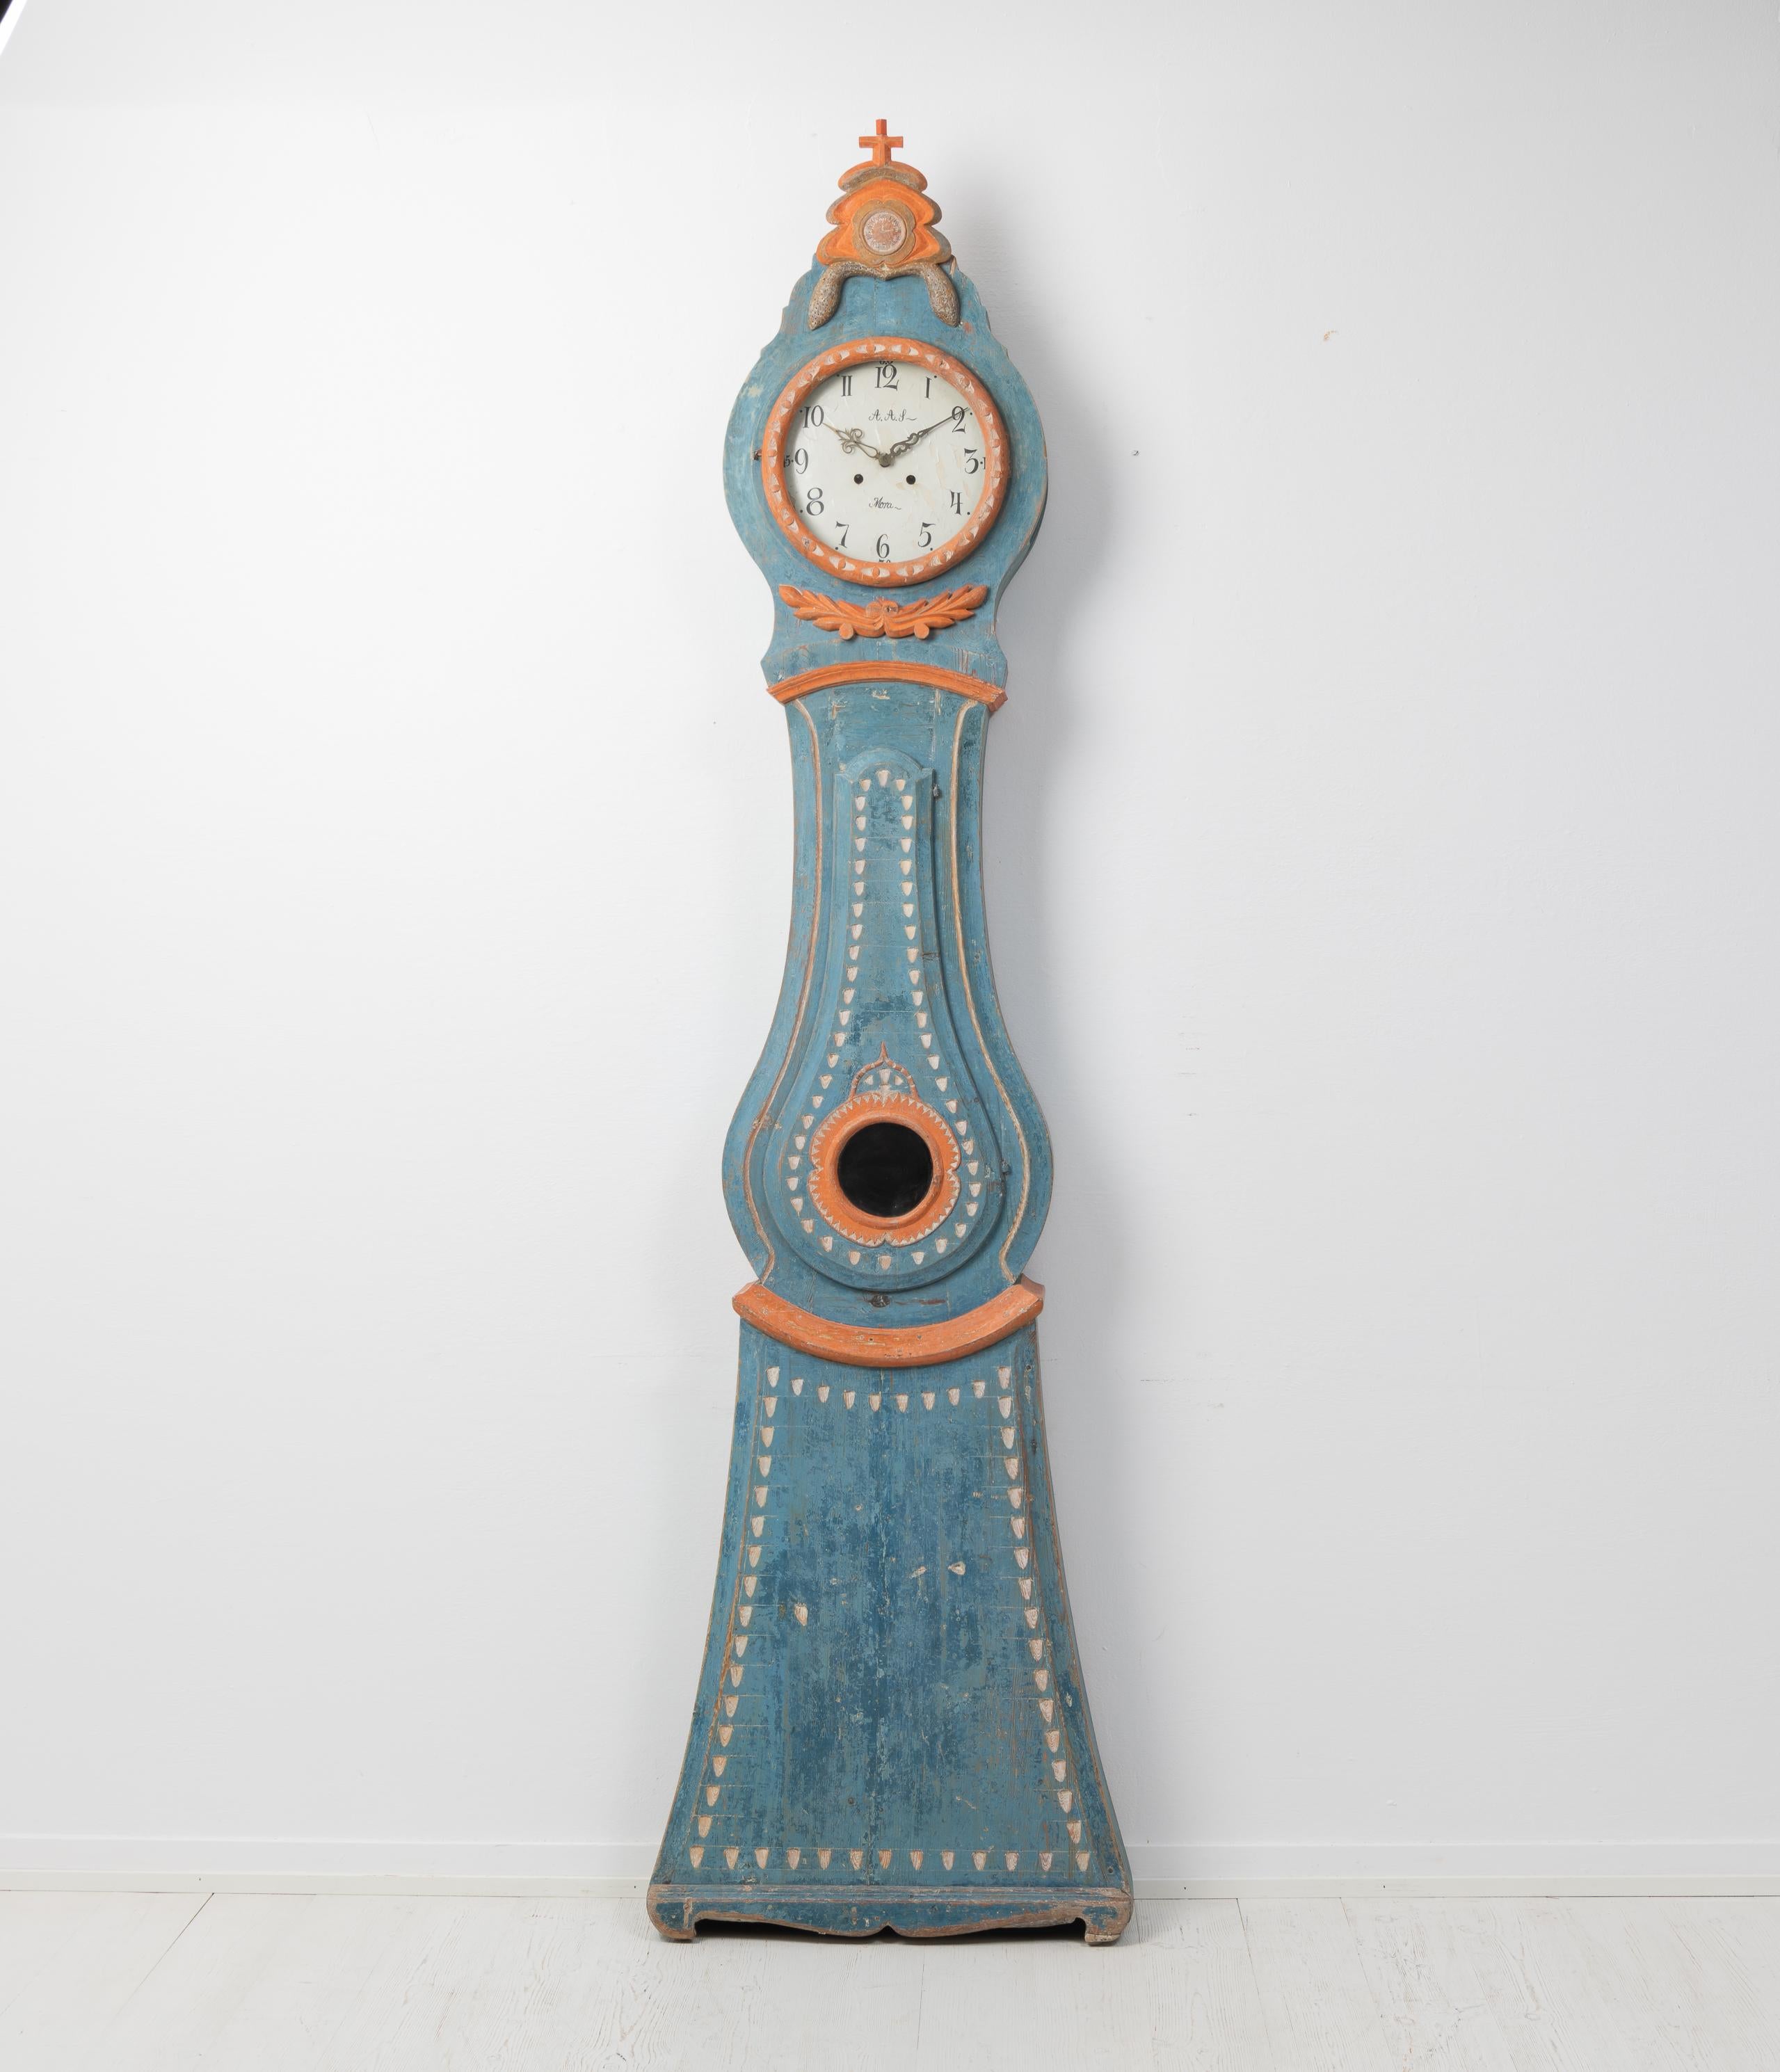 Genuine antique long case clock from northern Sweden. The clock is made around 1820 with a very well-made and elegant case in painted pine. The paint is the first original paint and it’s in an unusual colour scheme. Distress and patina after use. A